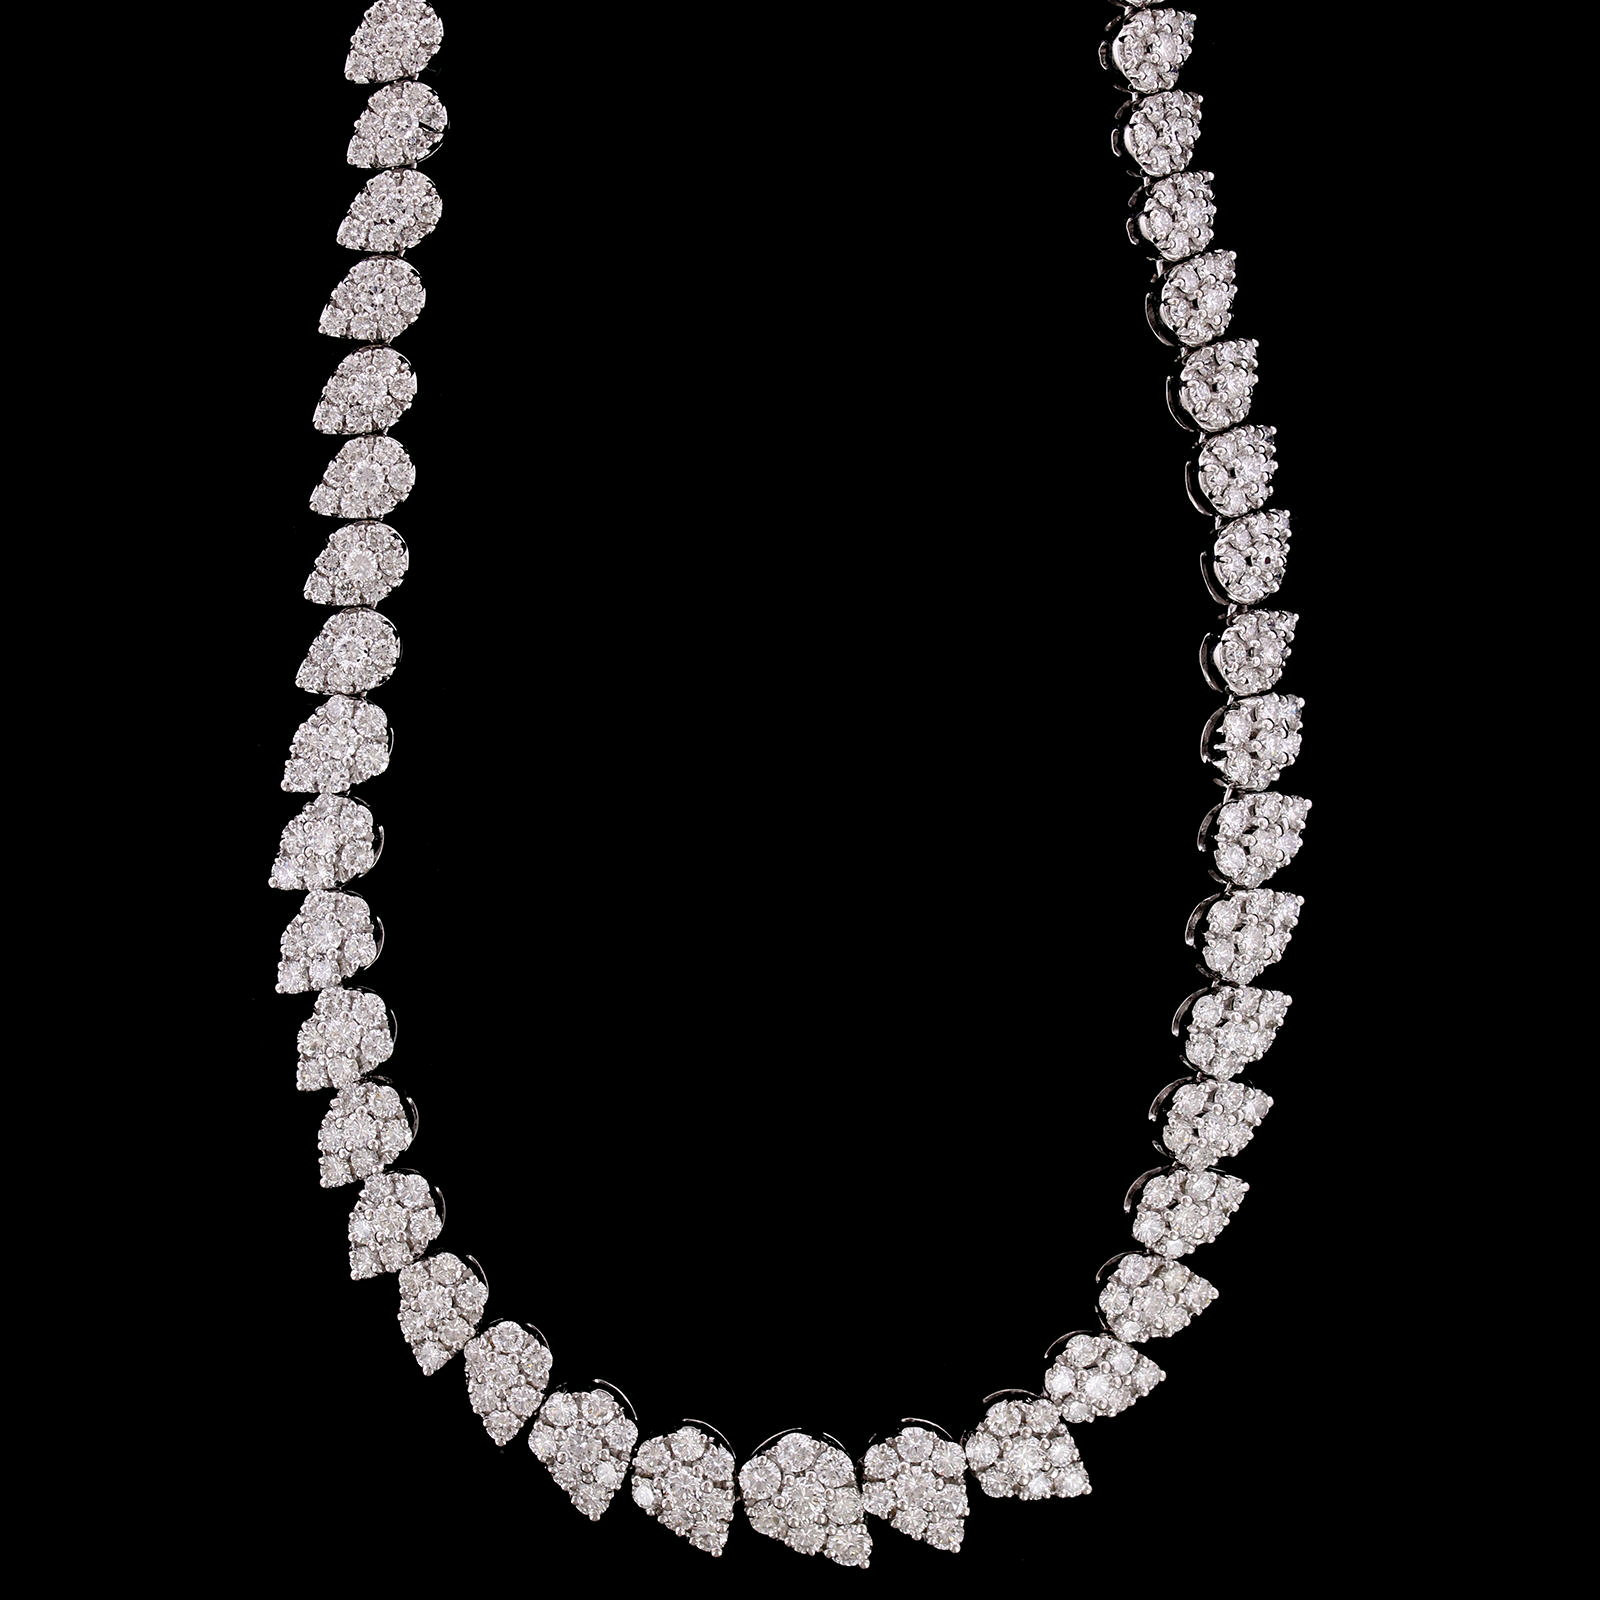 18K White Gold Andreoli Necklace with Graduated Diamonds